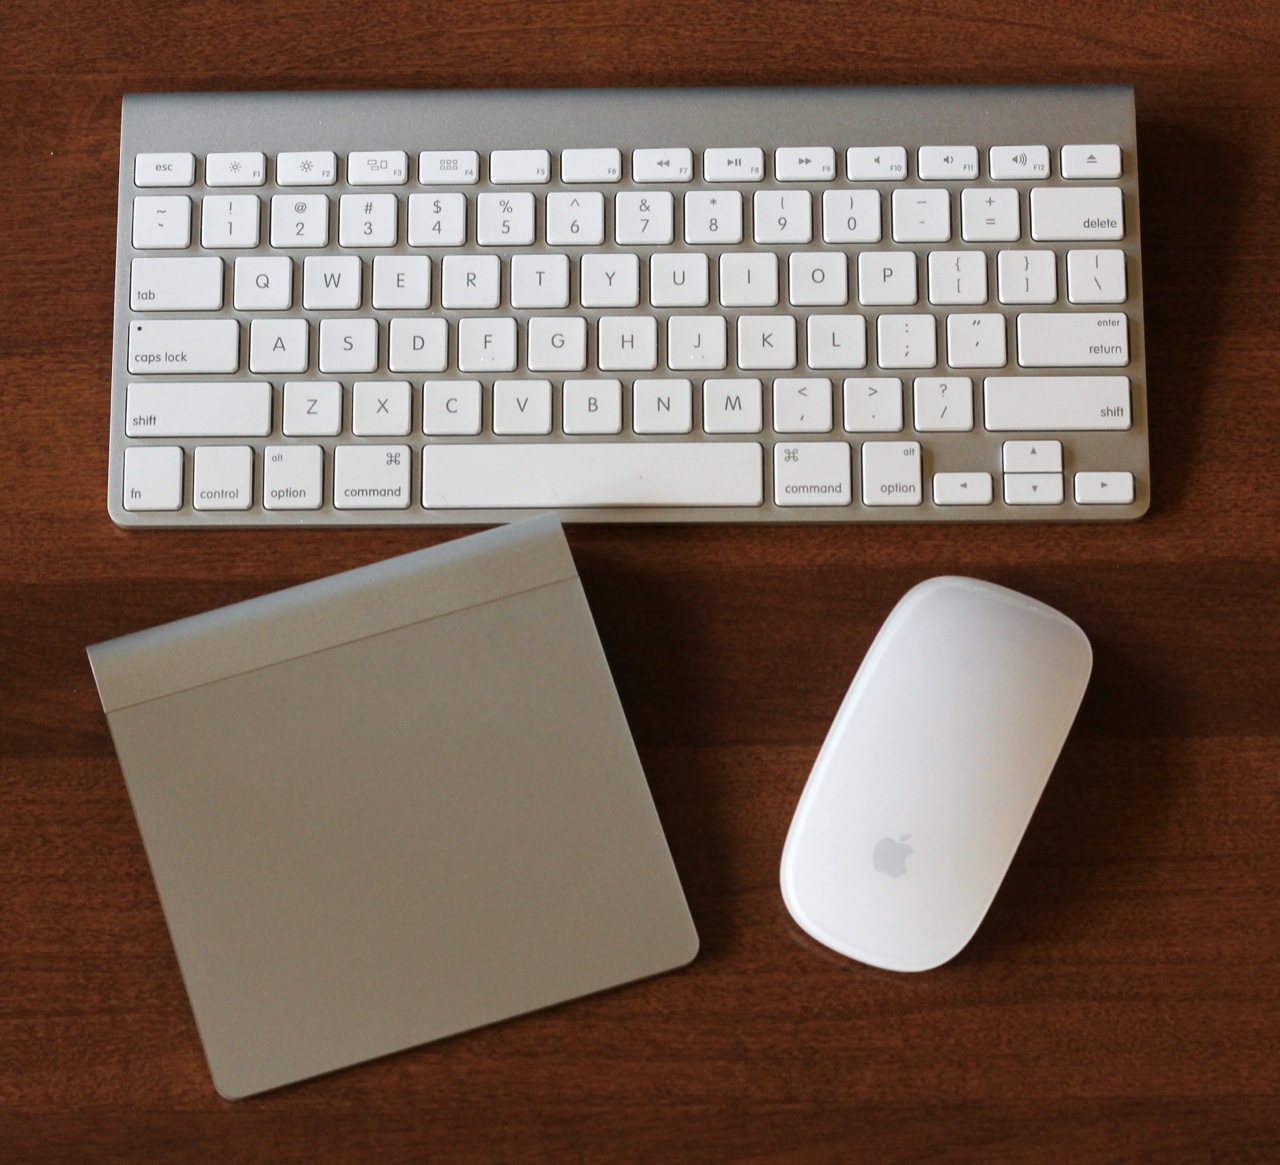 share keyboard and mouse between mac and pc